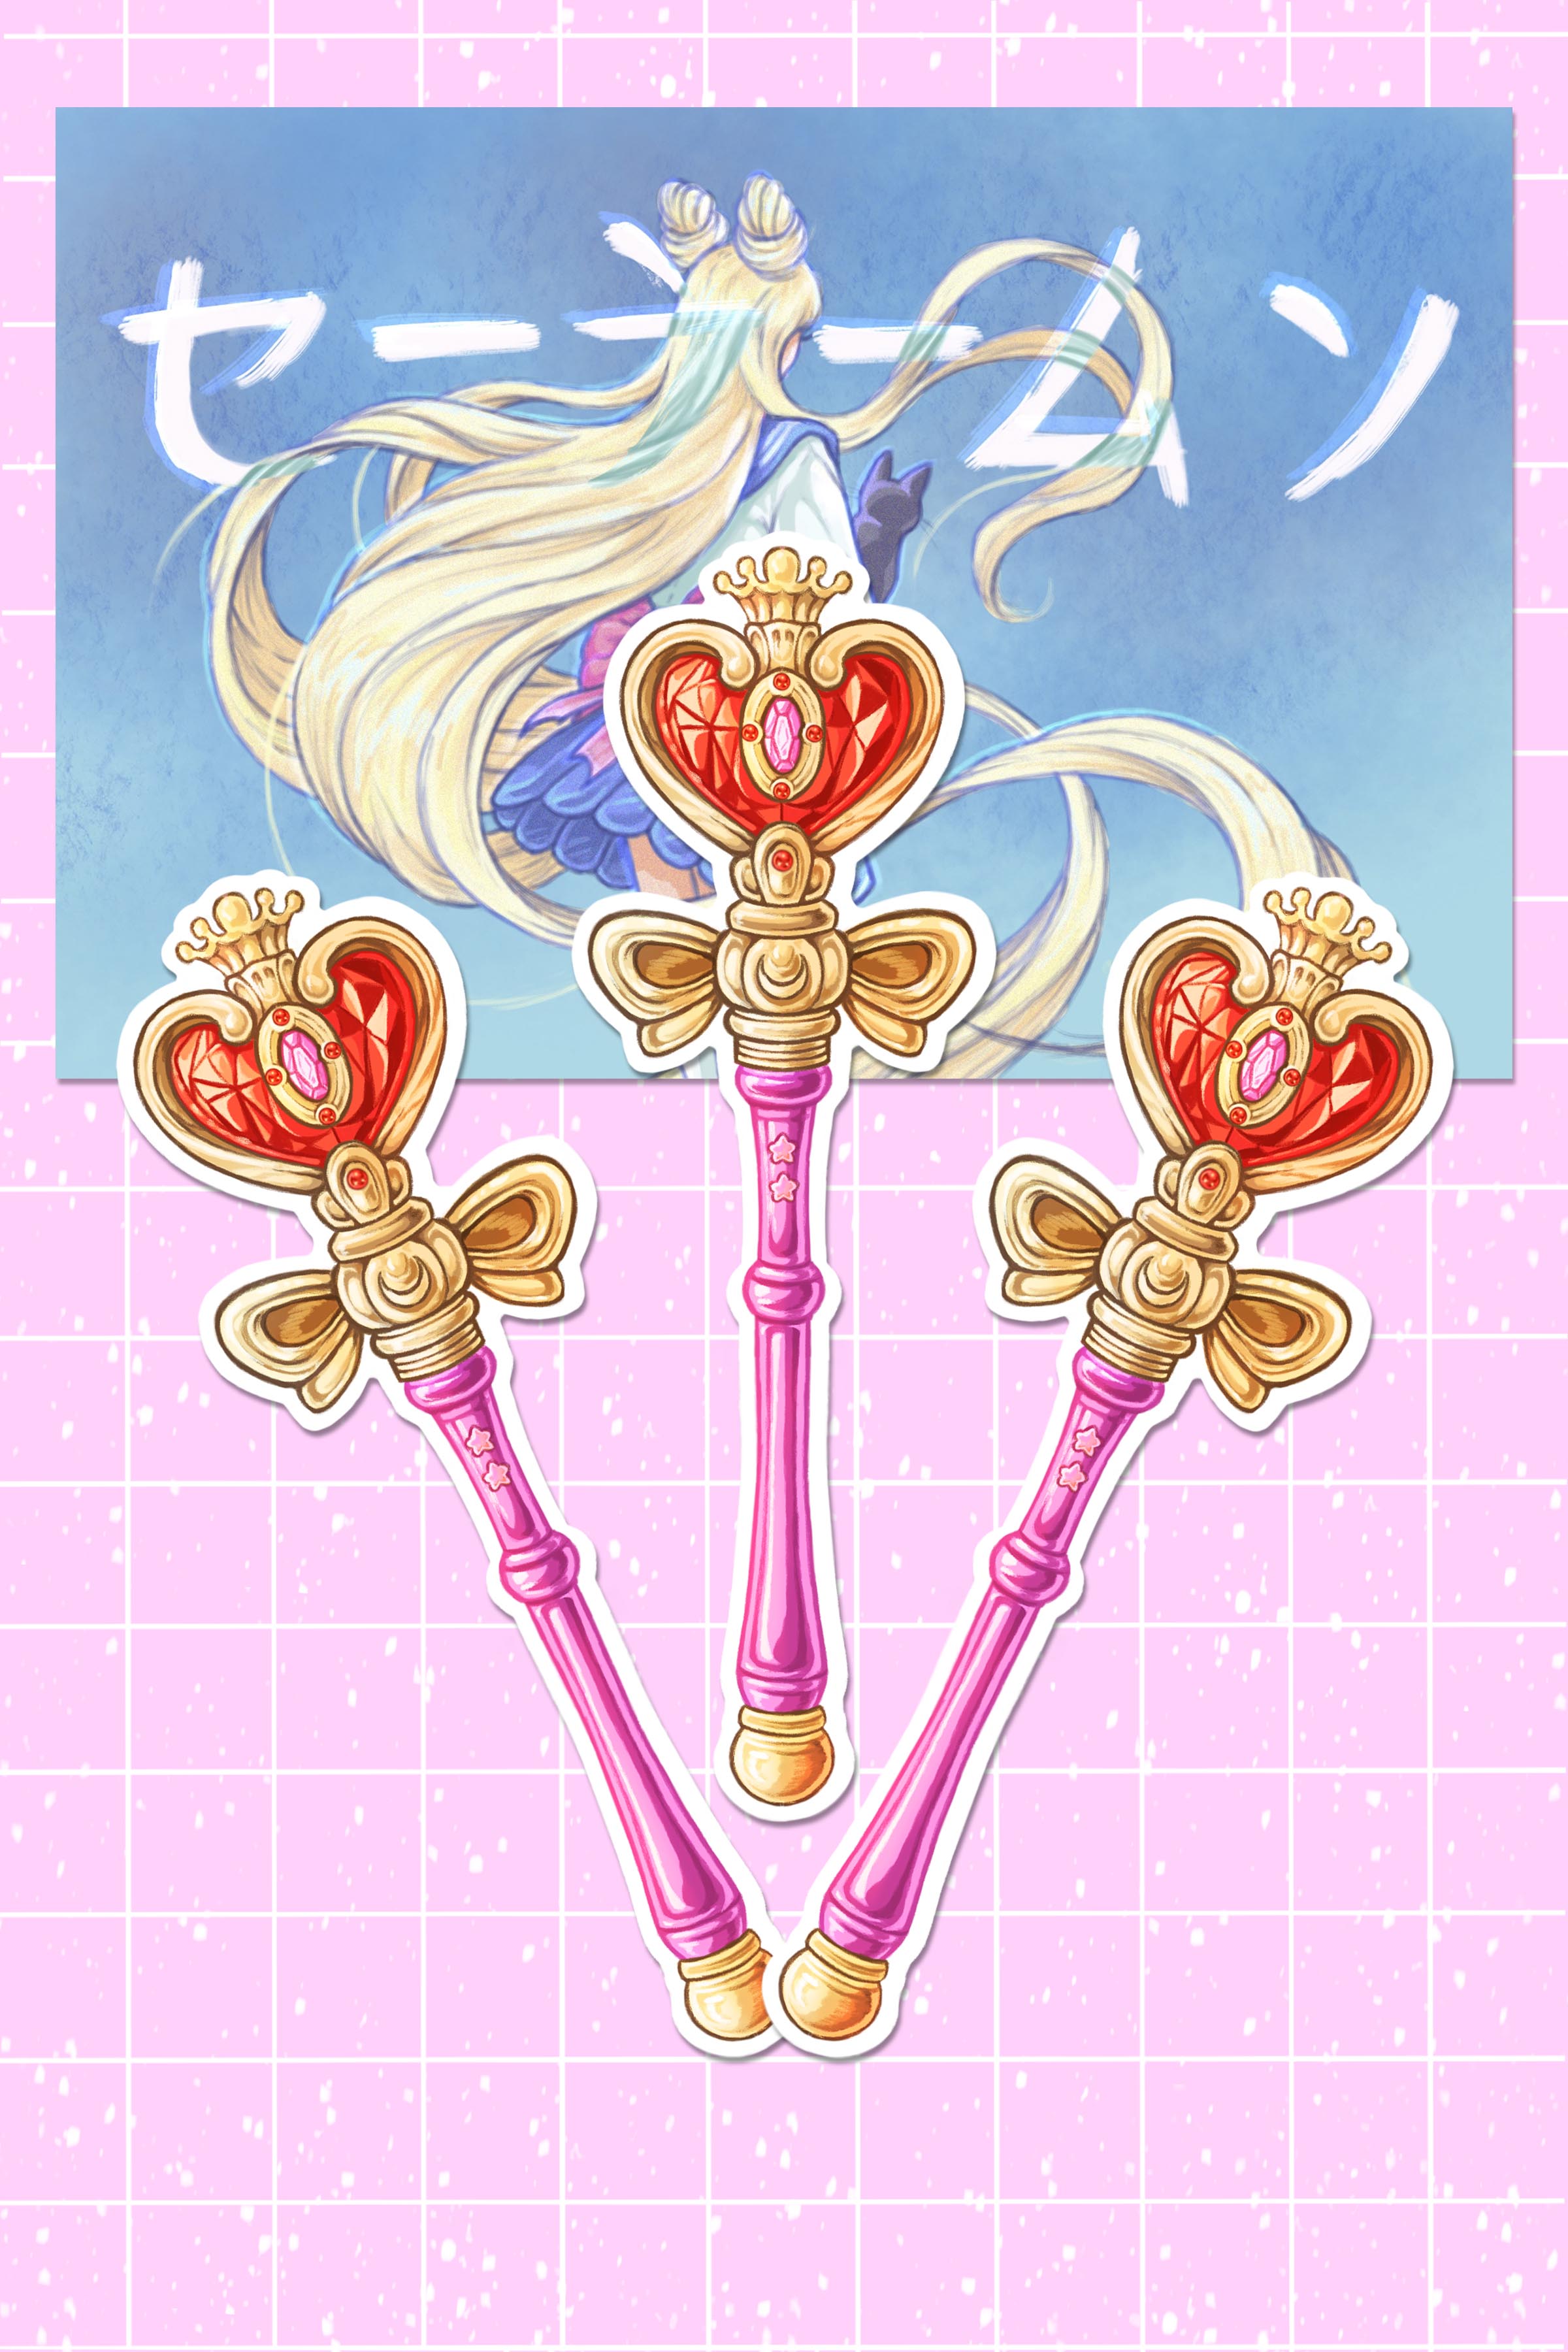 Sailor Scout Bow Stickers